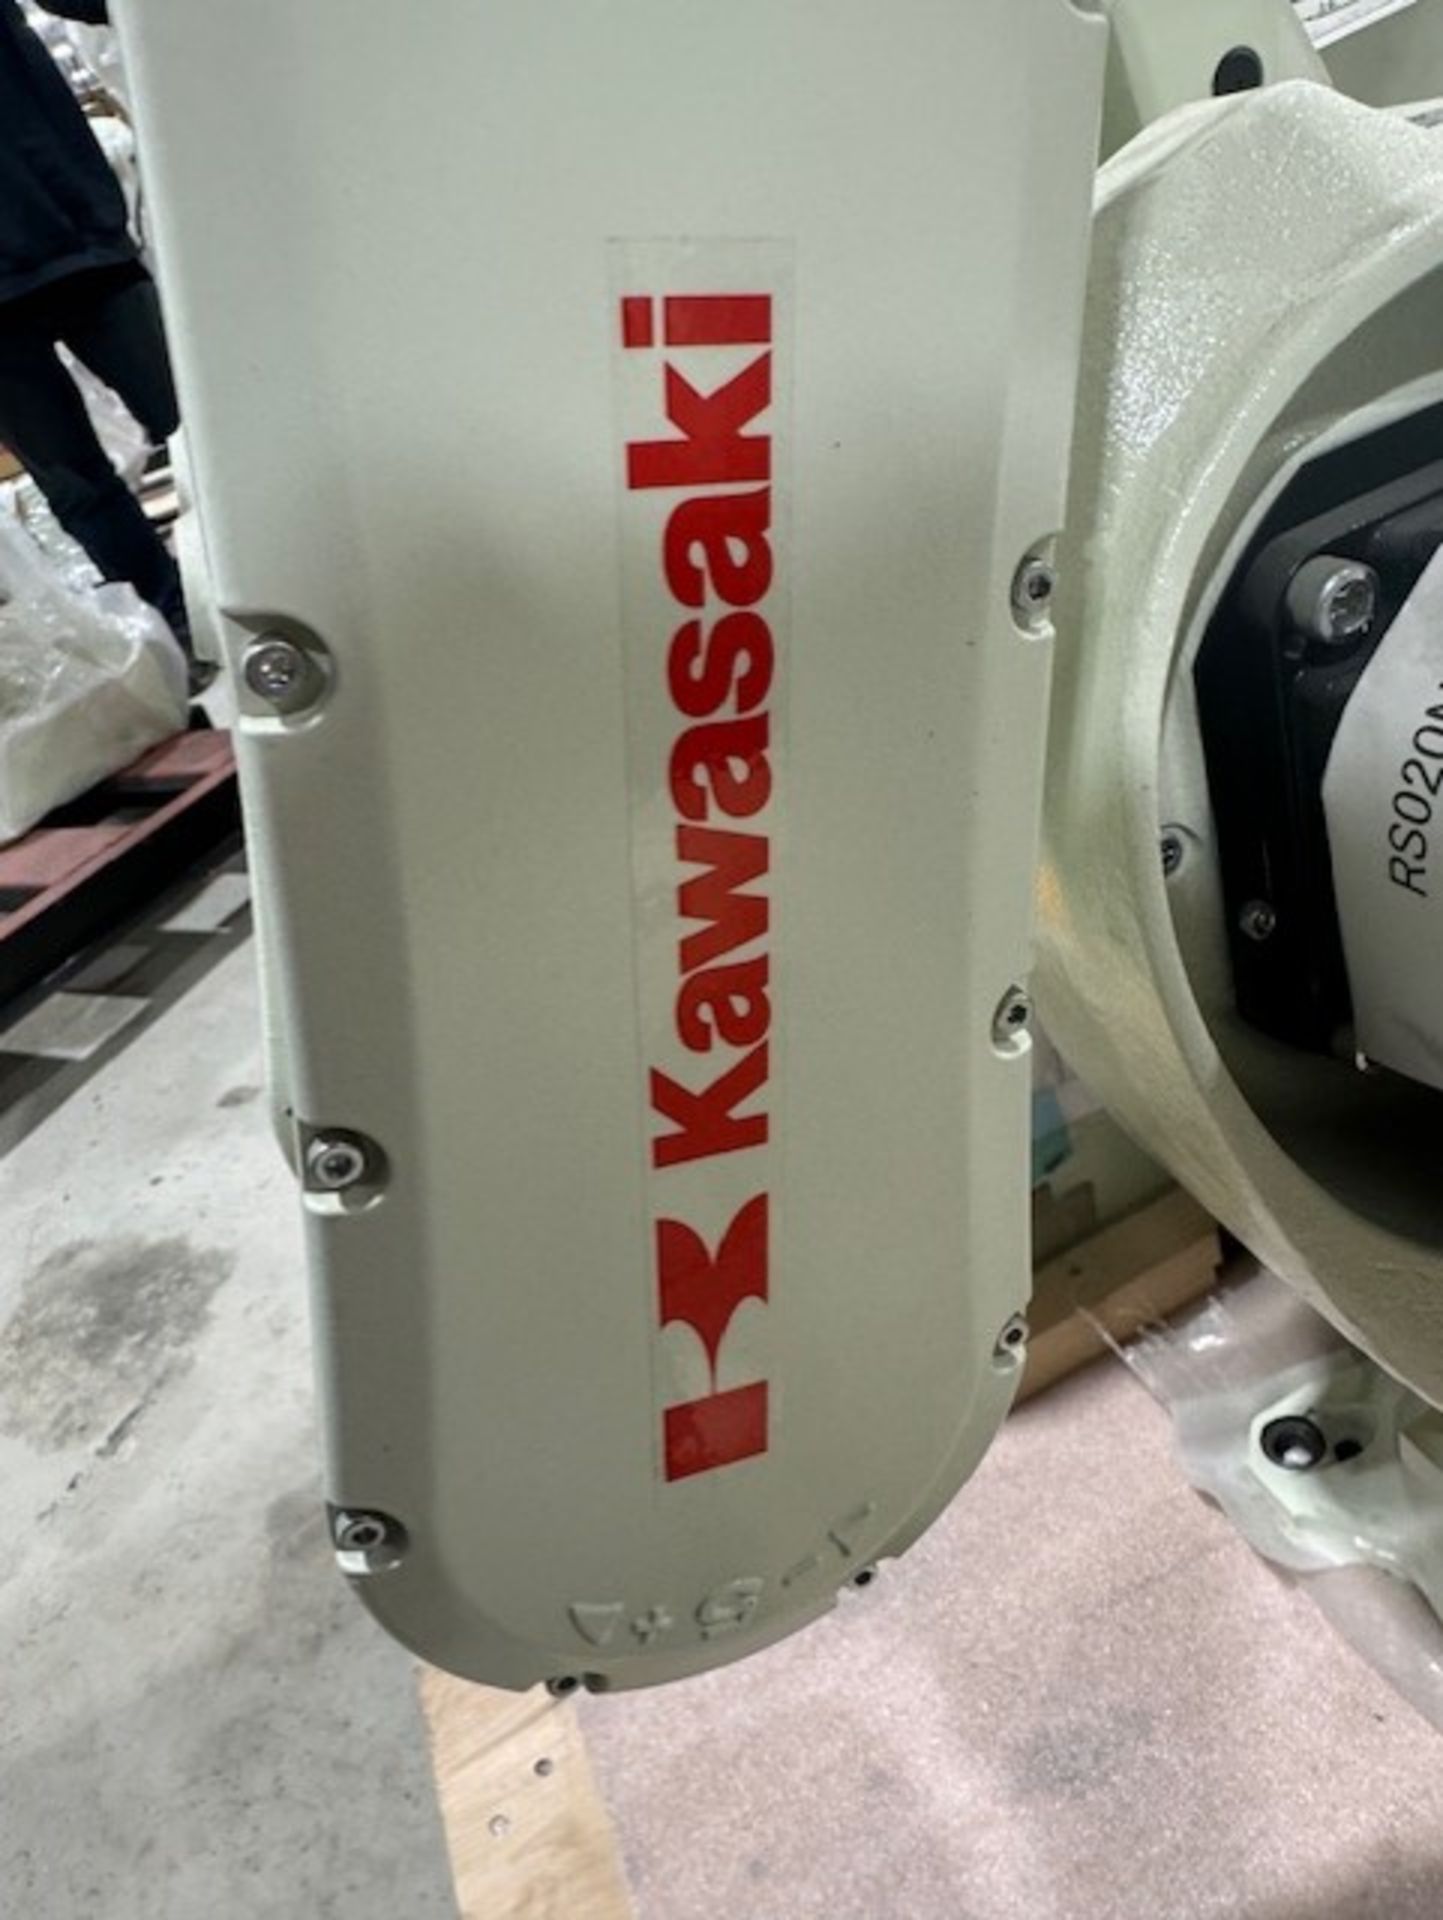 NEW KAWASAKI ROBOT MODEL RS020N, SN 4592, 20KG X 1725MM REACH WITH EO1 CONTROLS, CABLES & TEACH - Image 5 of 7